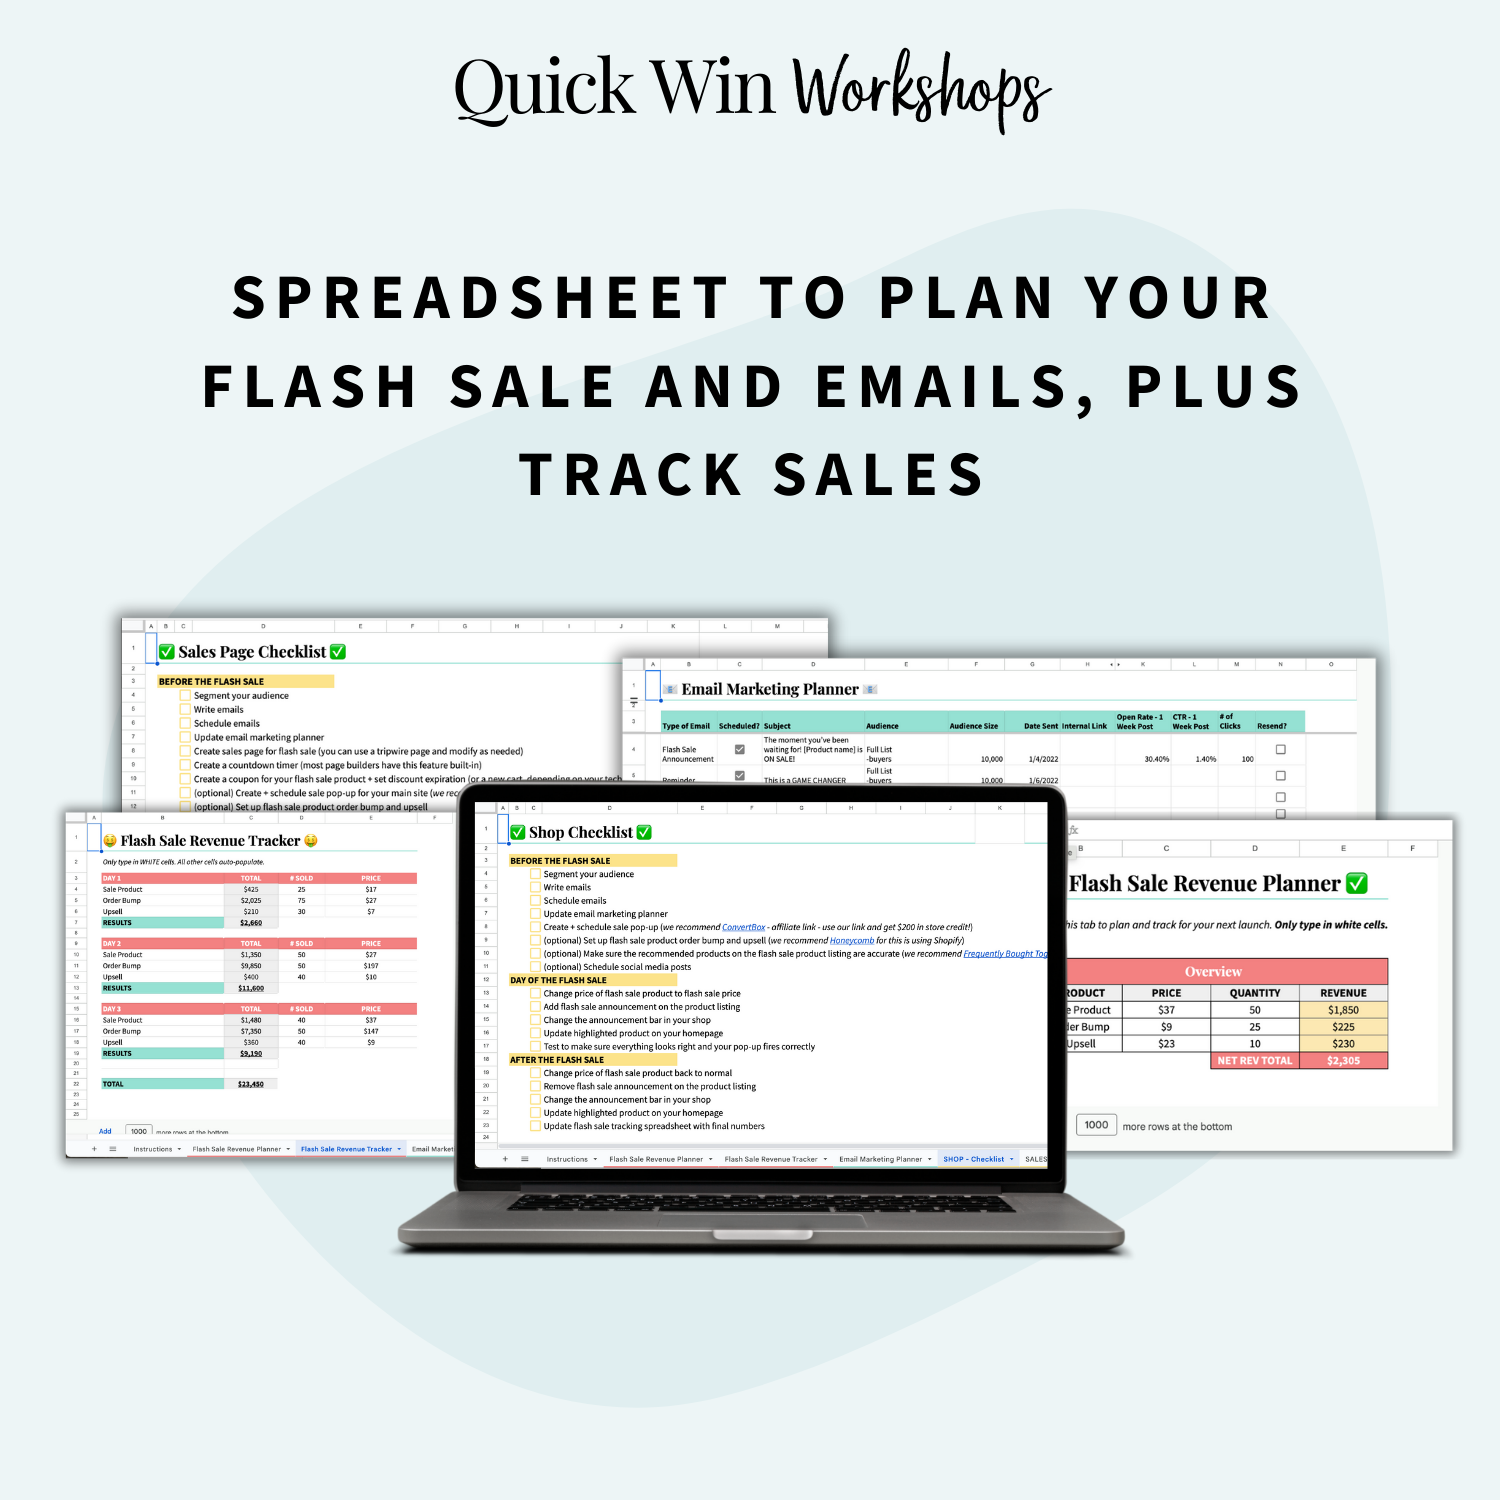 Quick Win Workshop: Make Selling Easy with Flash Sales - Spreadsheet to help you plan your flash sale and emails, plus track sales